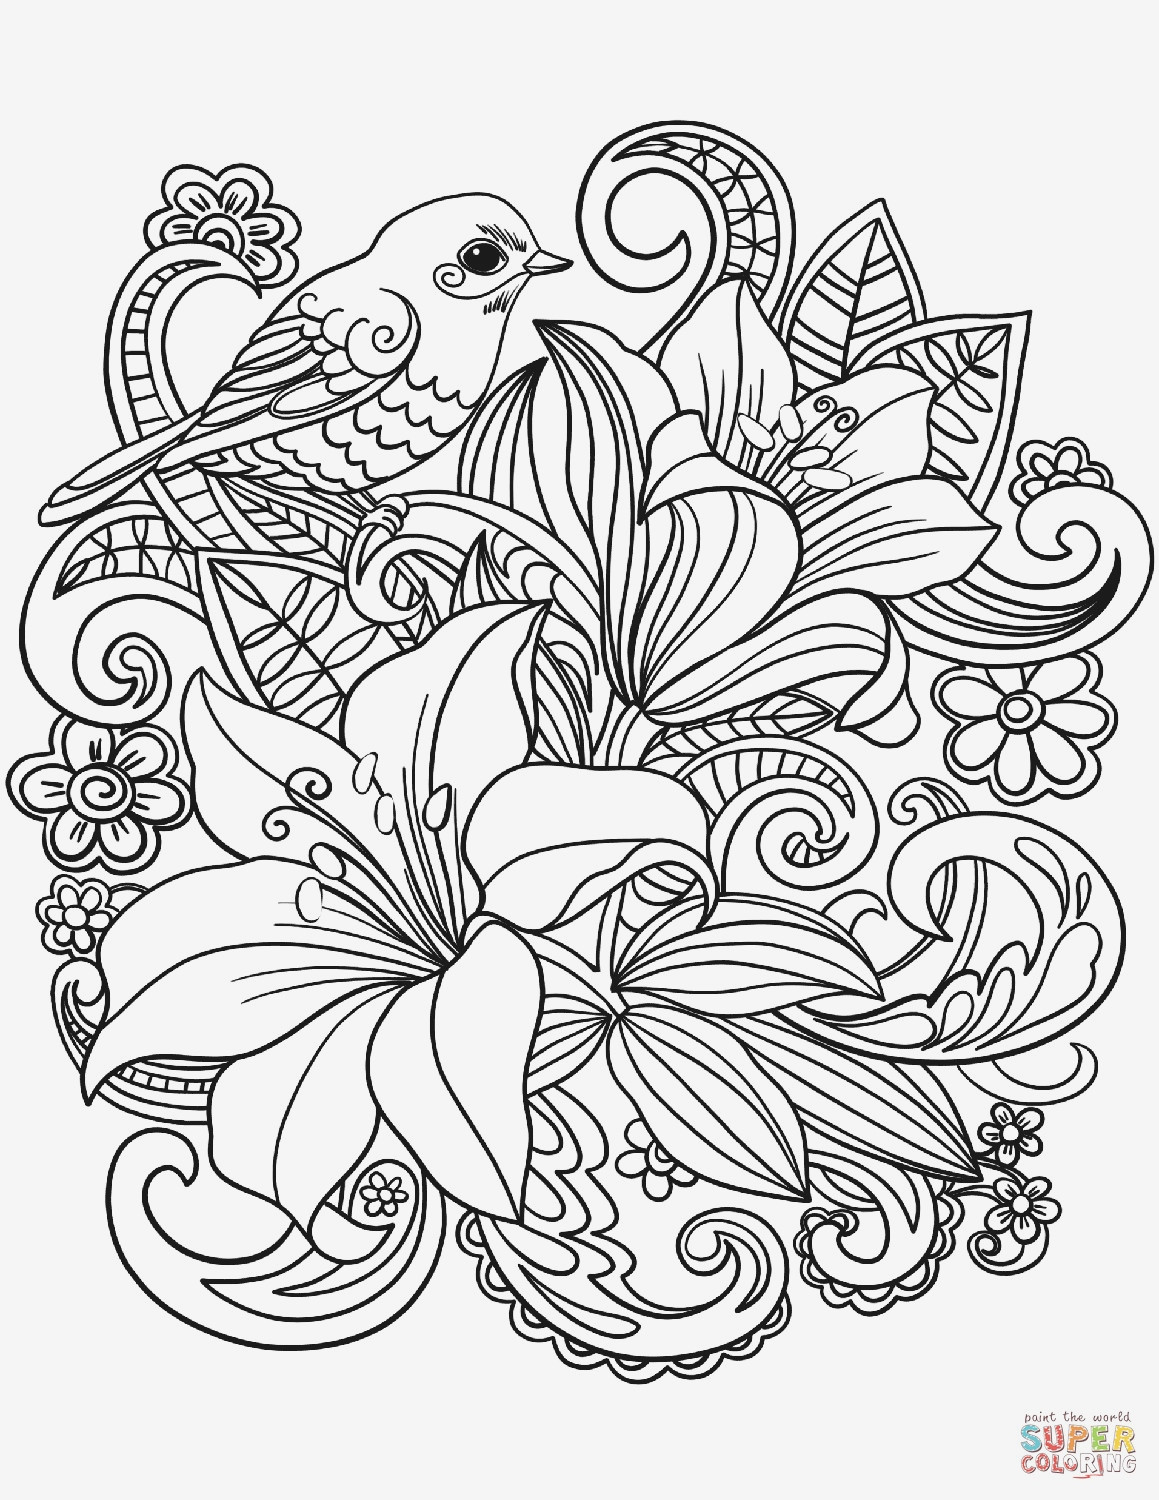 15 Famous Flower Vase Pic 2024 free download flower vase pic of free flower coloring pages printable cool vases flower vase coloring with regard to free flower coloring pages printable cool vases flower vase coloring page pages flowers